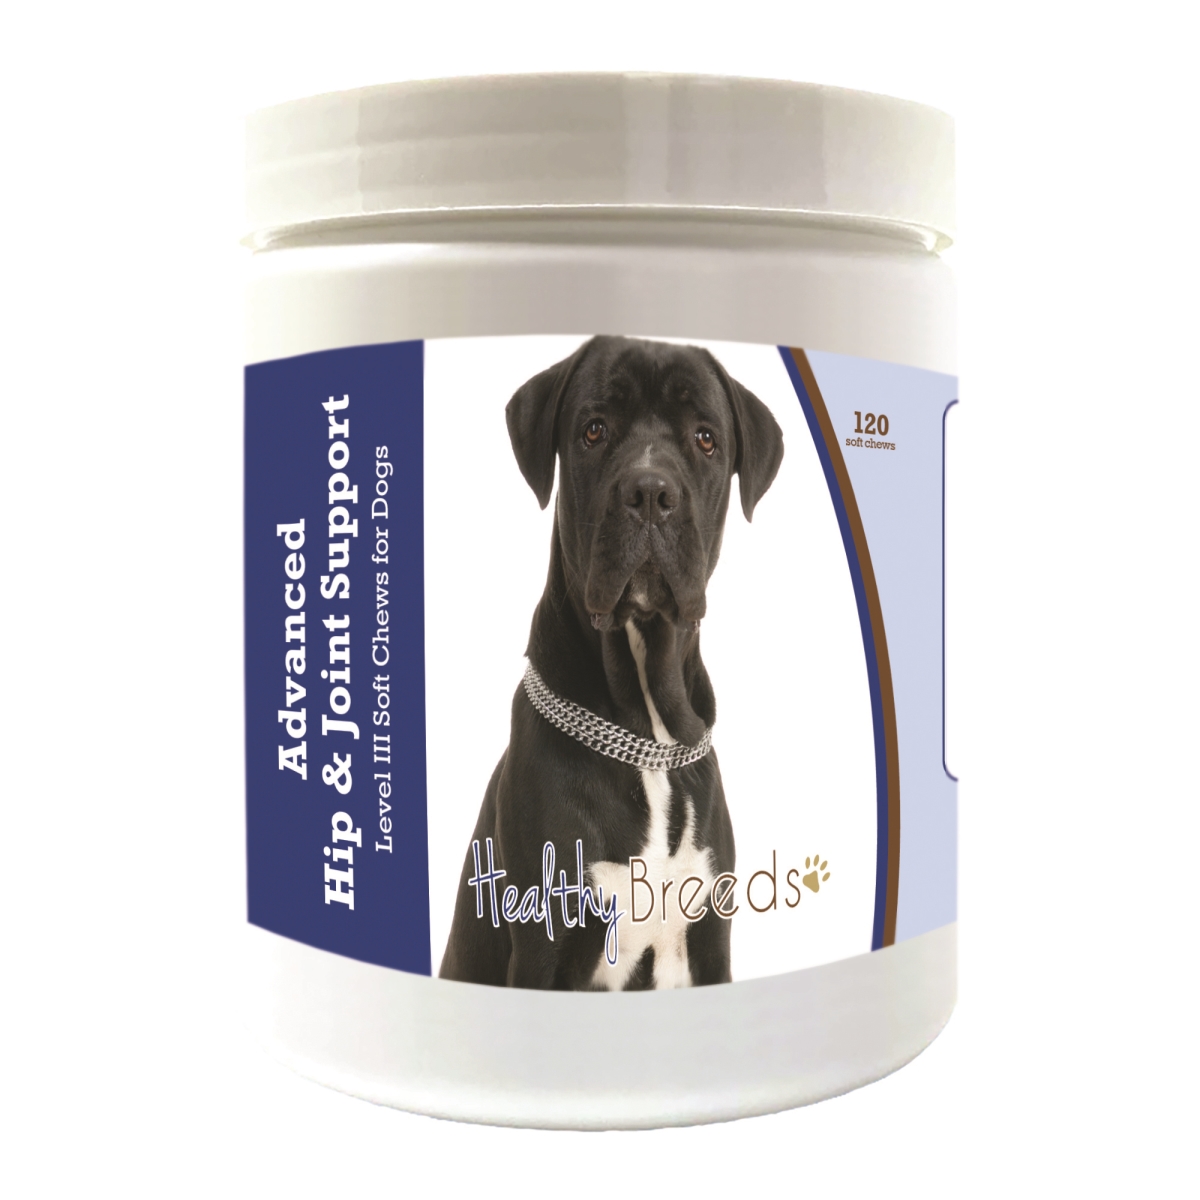 Picture of Healthy Breeds 192959897852 Cane Corso Advanced Hip & Joint Support Level III Soft Chews for Dogs